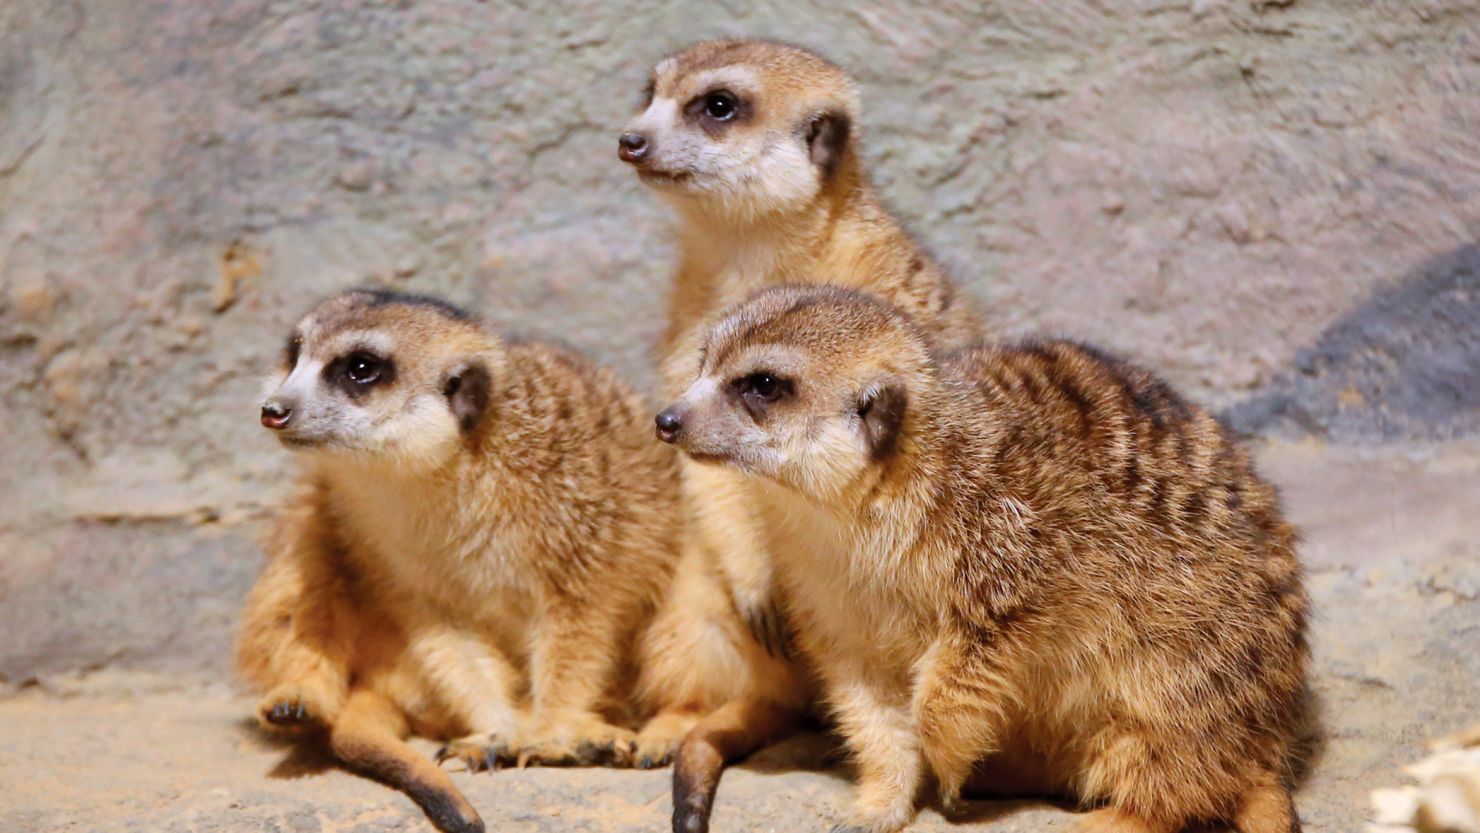 Dye may be to blame for five meerkat deaths at Philadelphia Zoo, officials say.